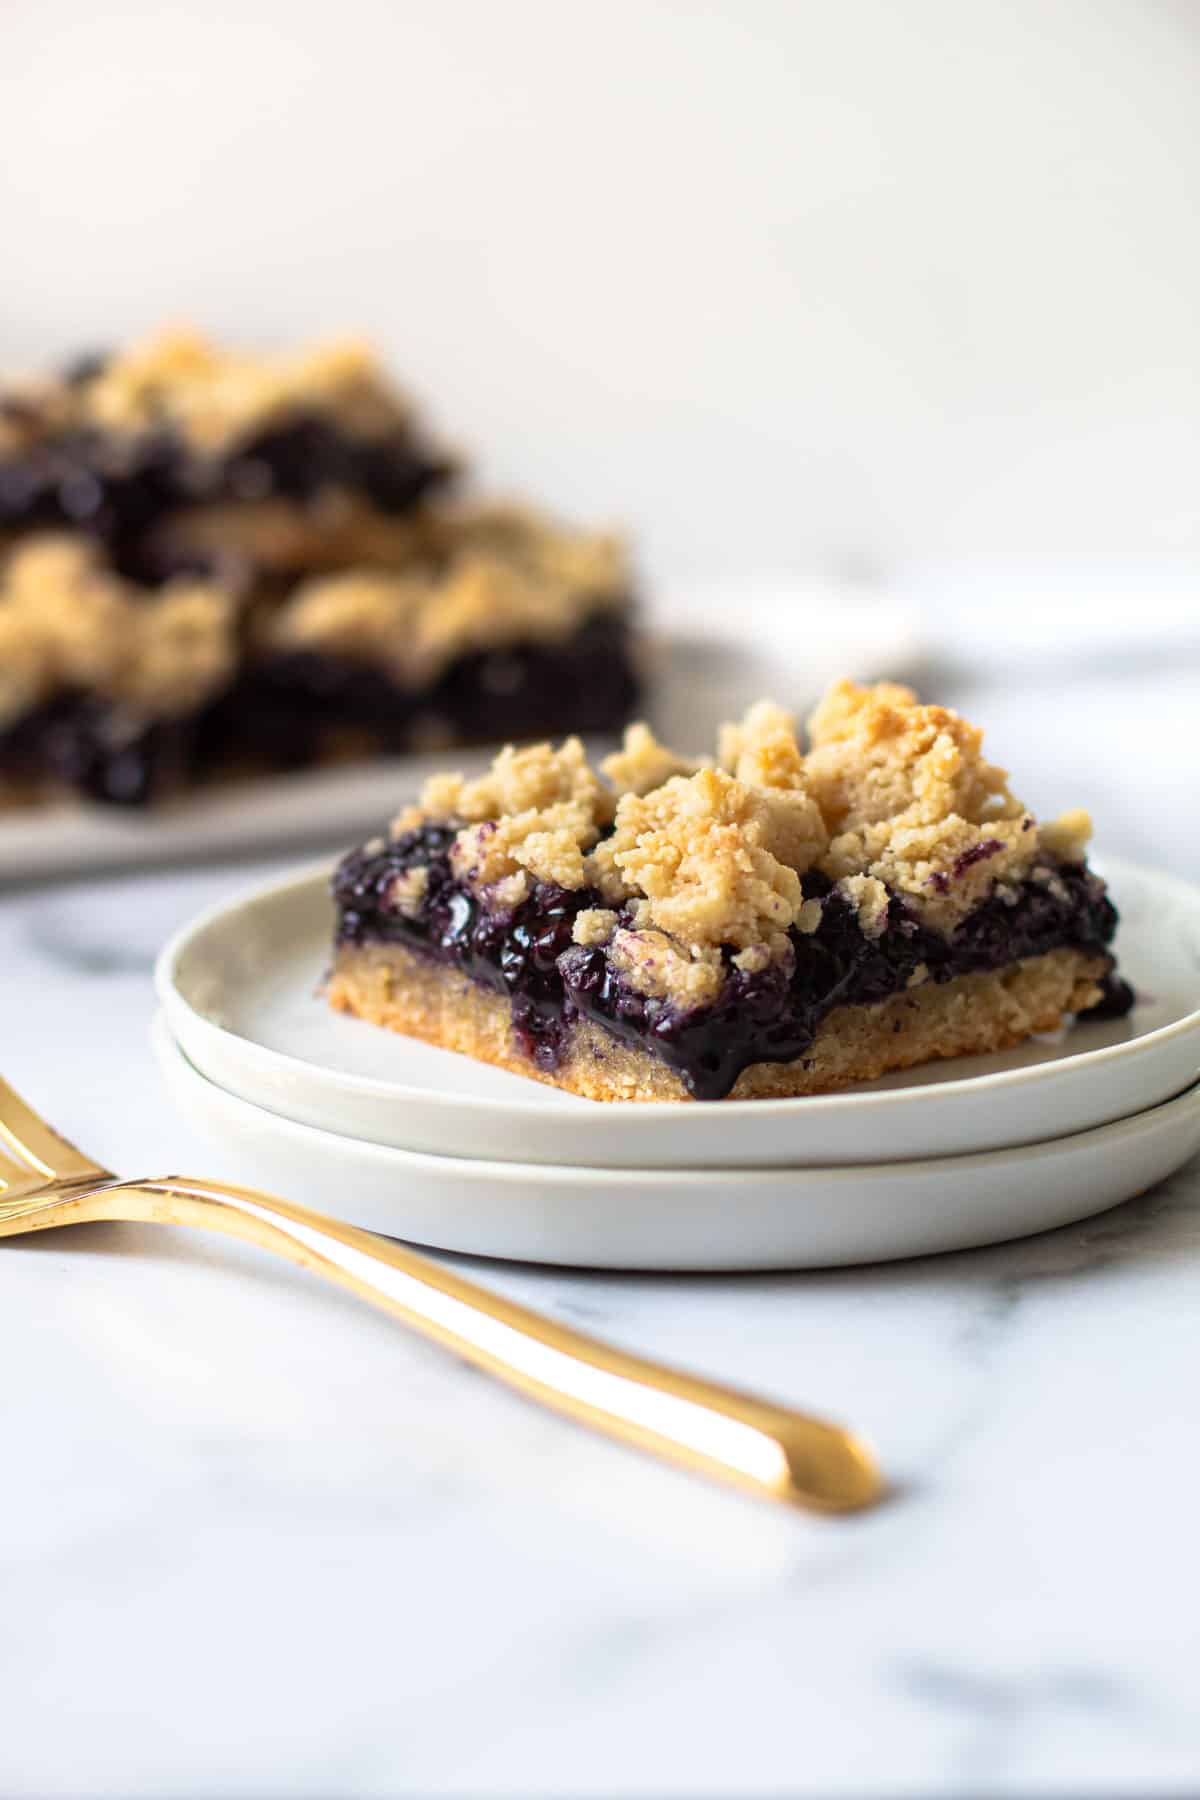 A healthy blueberry bar on a plate.